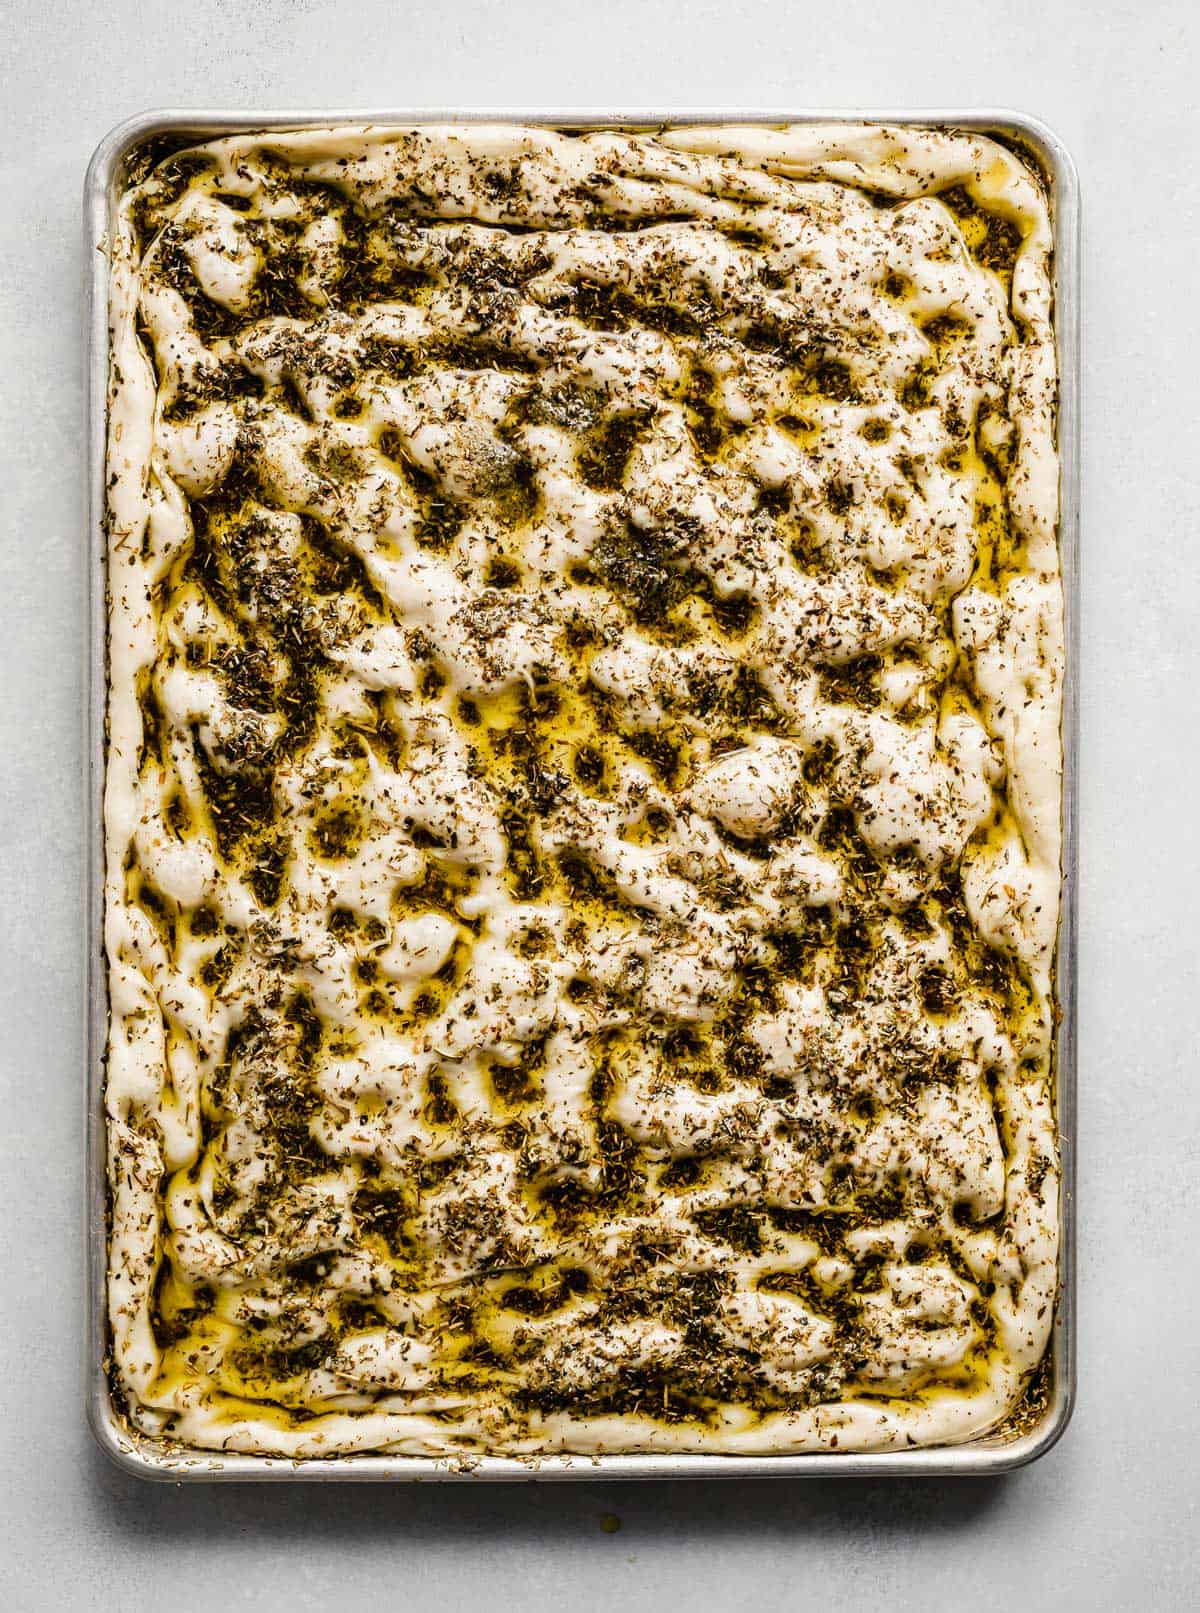 A baking sheet that has focaccia bread dough spread along the full size of the sheet, topped with herb oil.